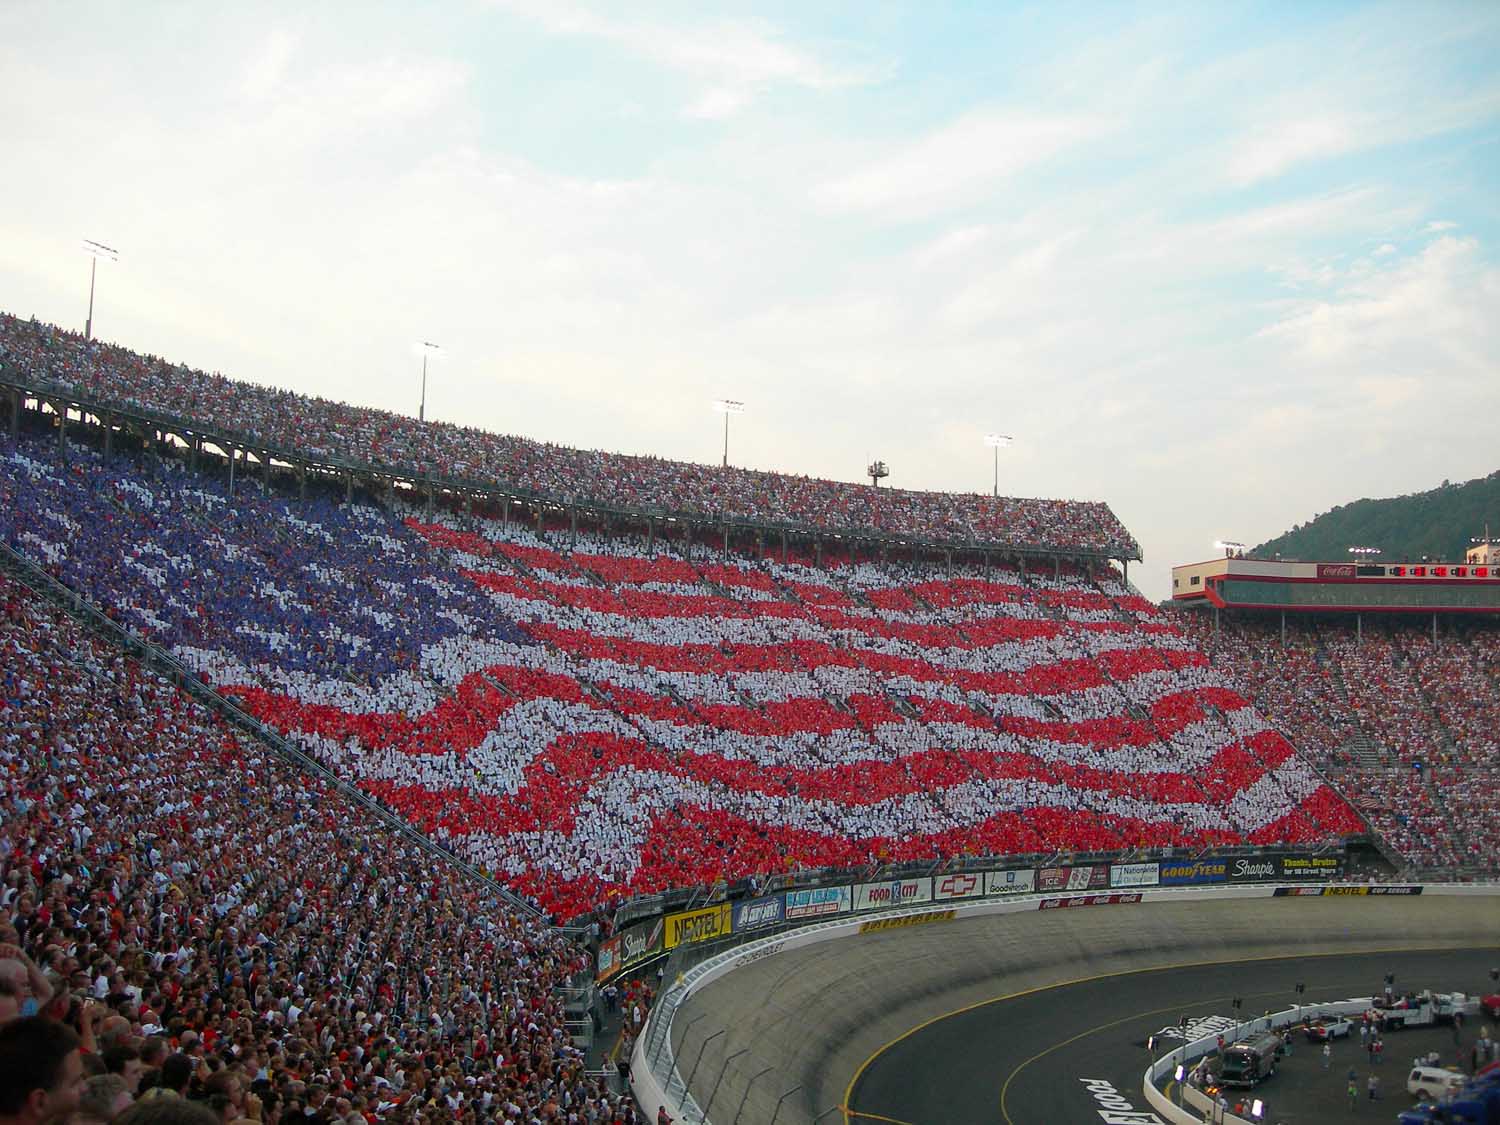 Best Way To Buy Daytona 500 Tickets with Discount Code CHEAP for the